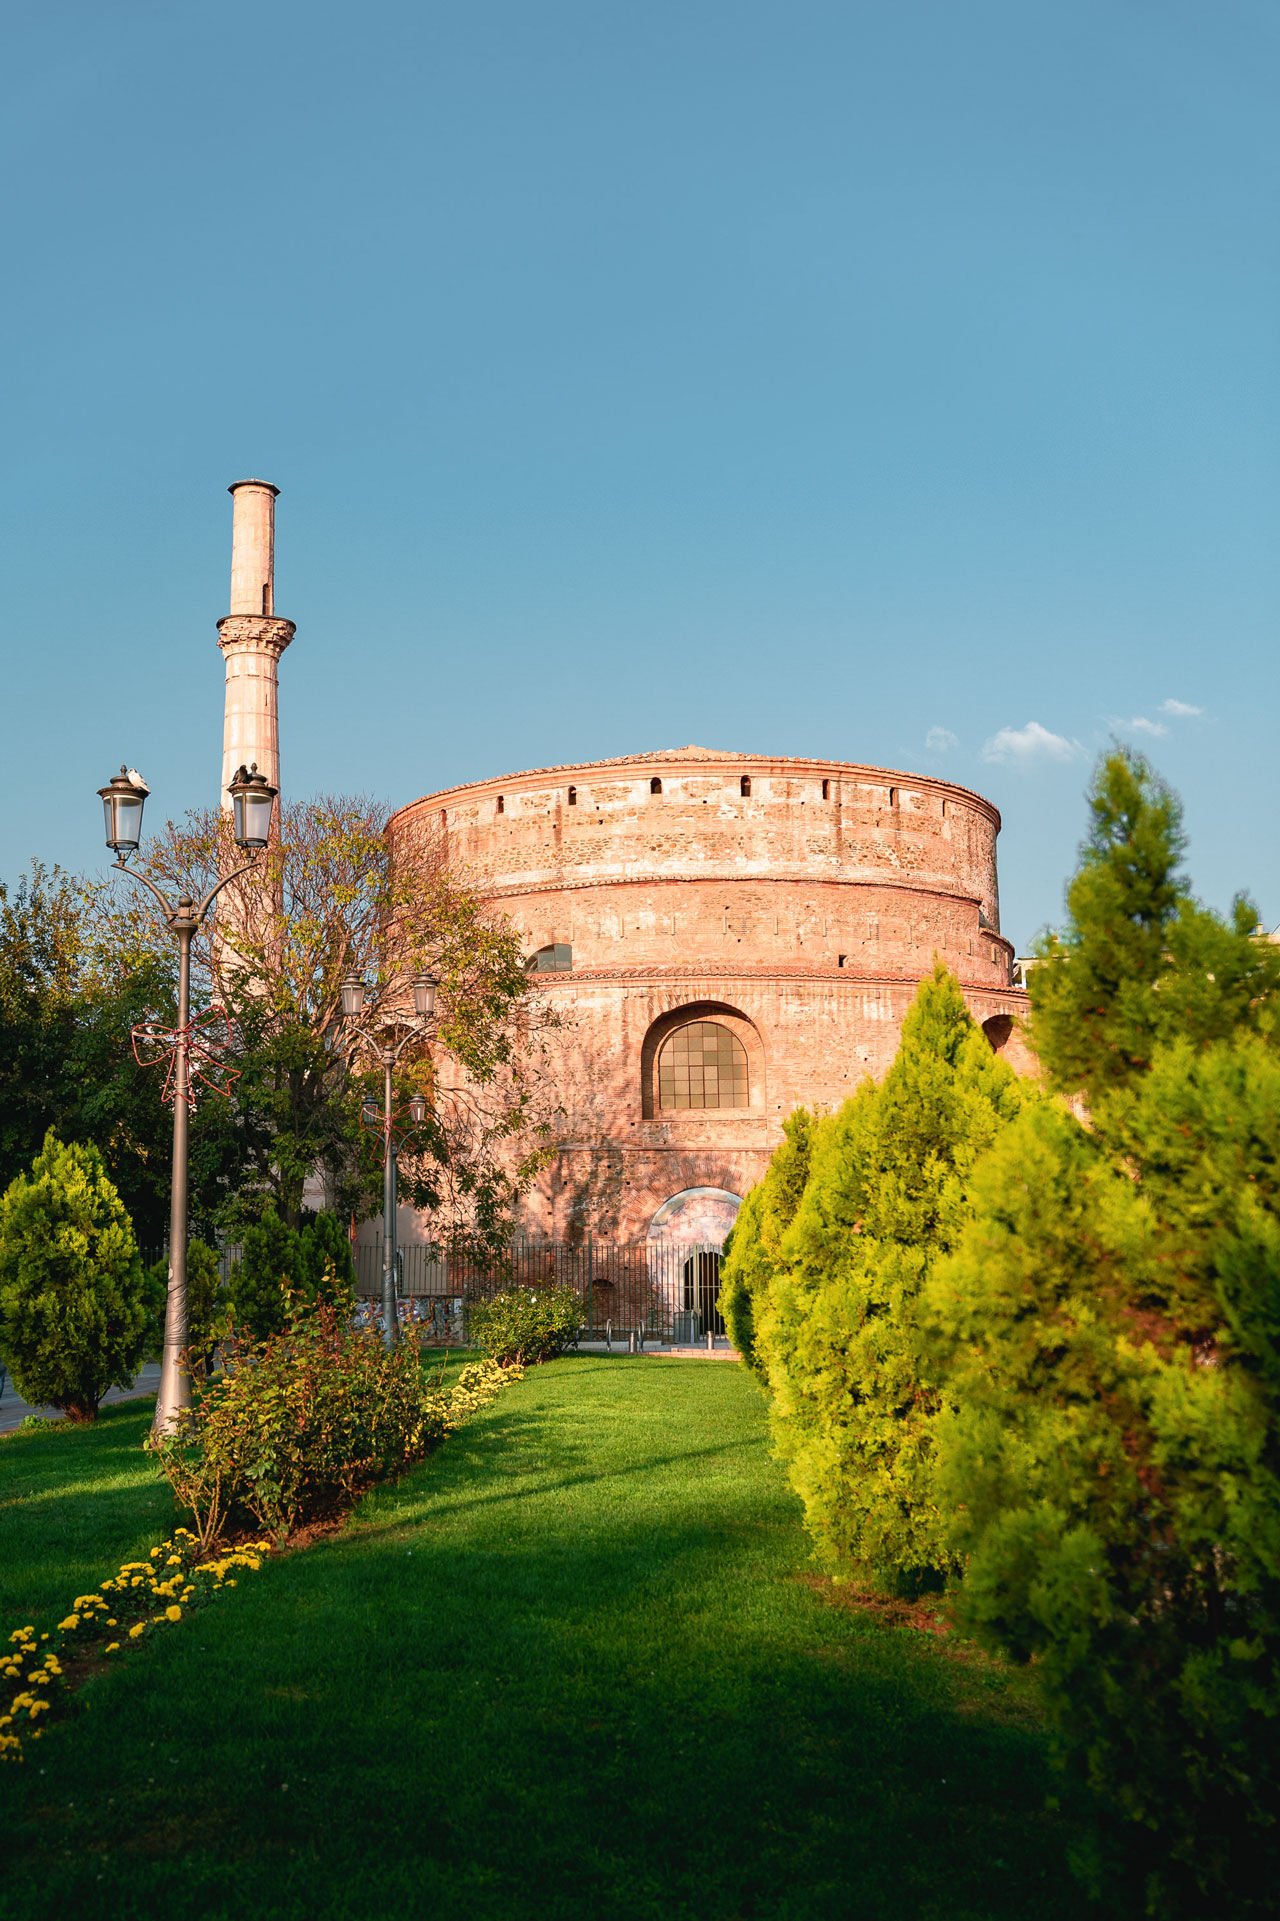 The UNESCO-protected Rotunda is part of the Galerian Complex of Thessaloniki